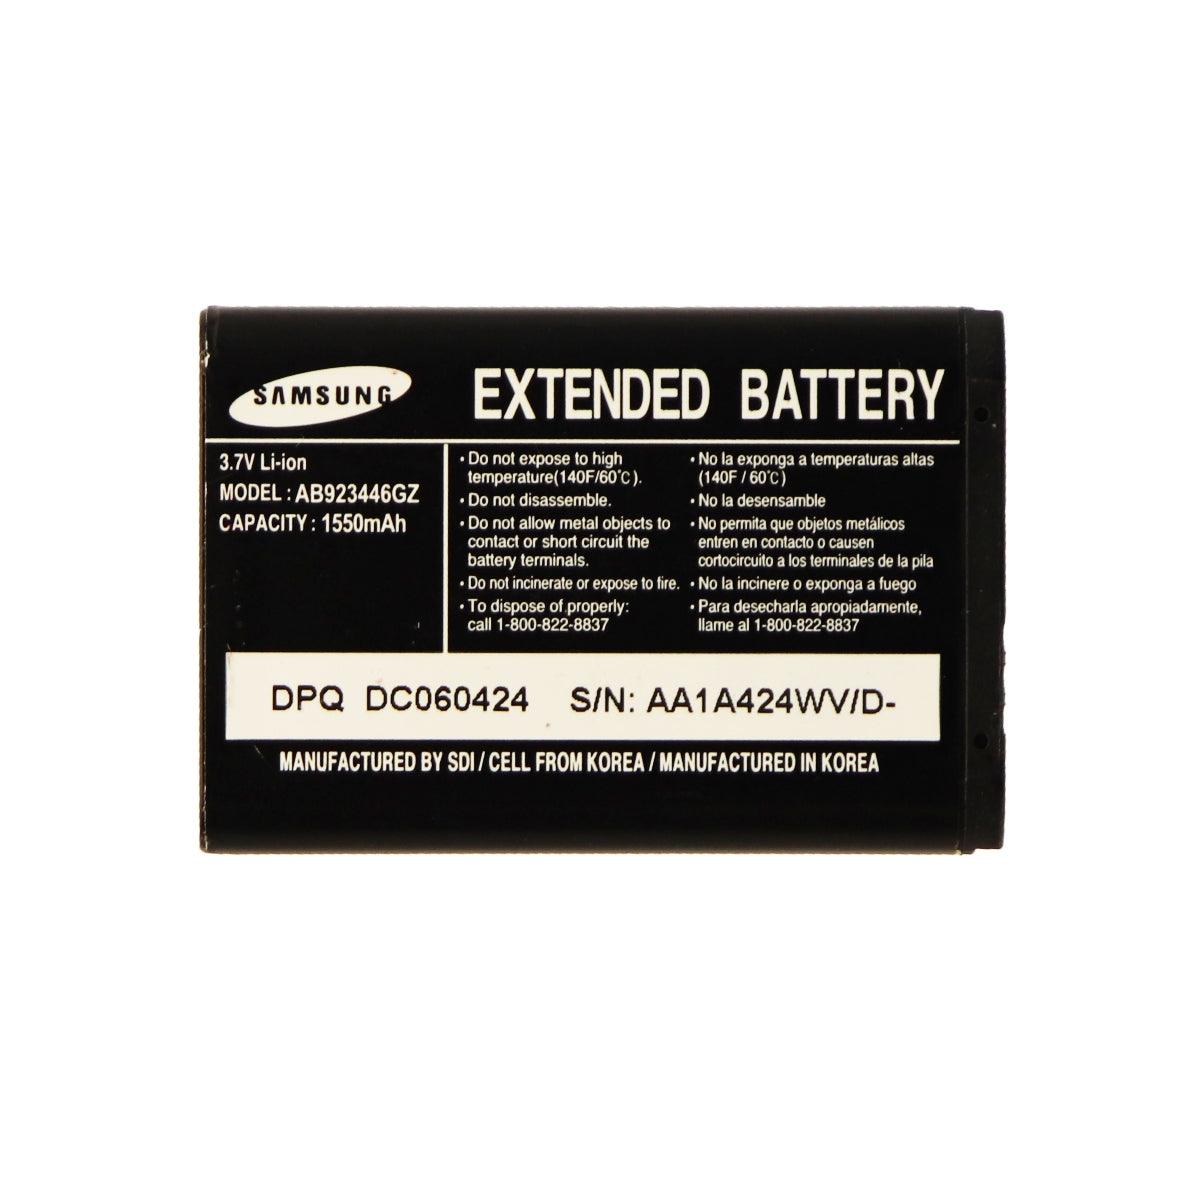 Samsung OEM Extended 1550mAh Li-ion Battery (AB923446GZ) 3.7V for A930 U620 A990 Cell Phone - Batteries Samsung    - Simple Cell Bulk Wholesale Pricing - USA Seller